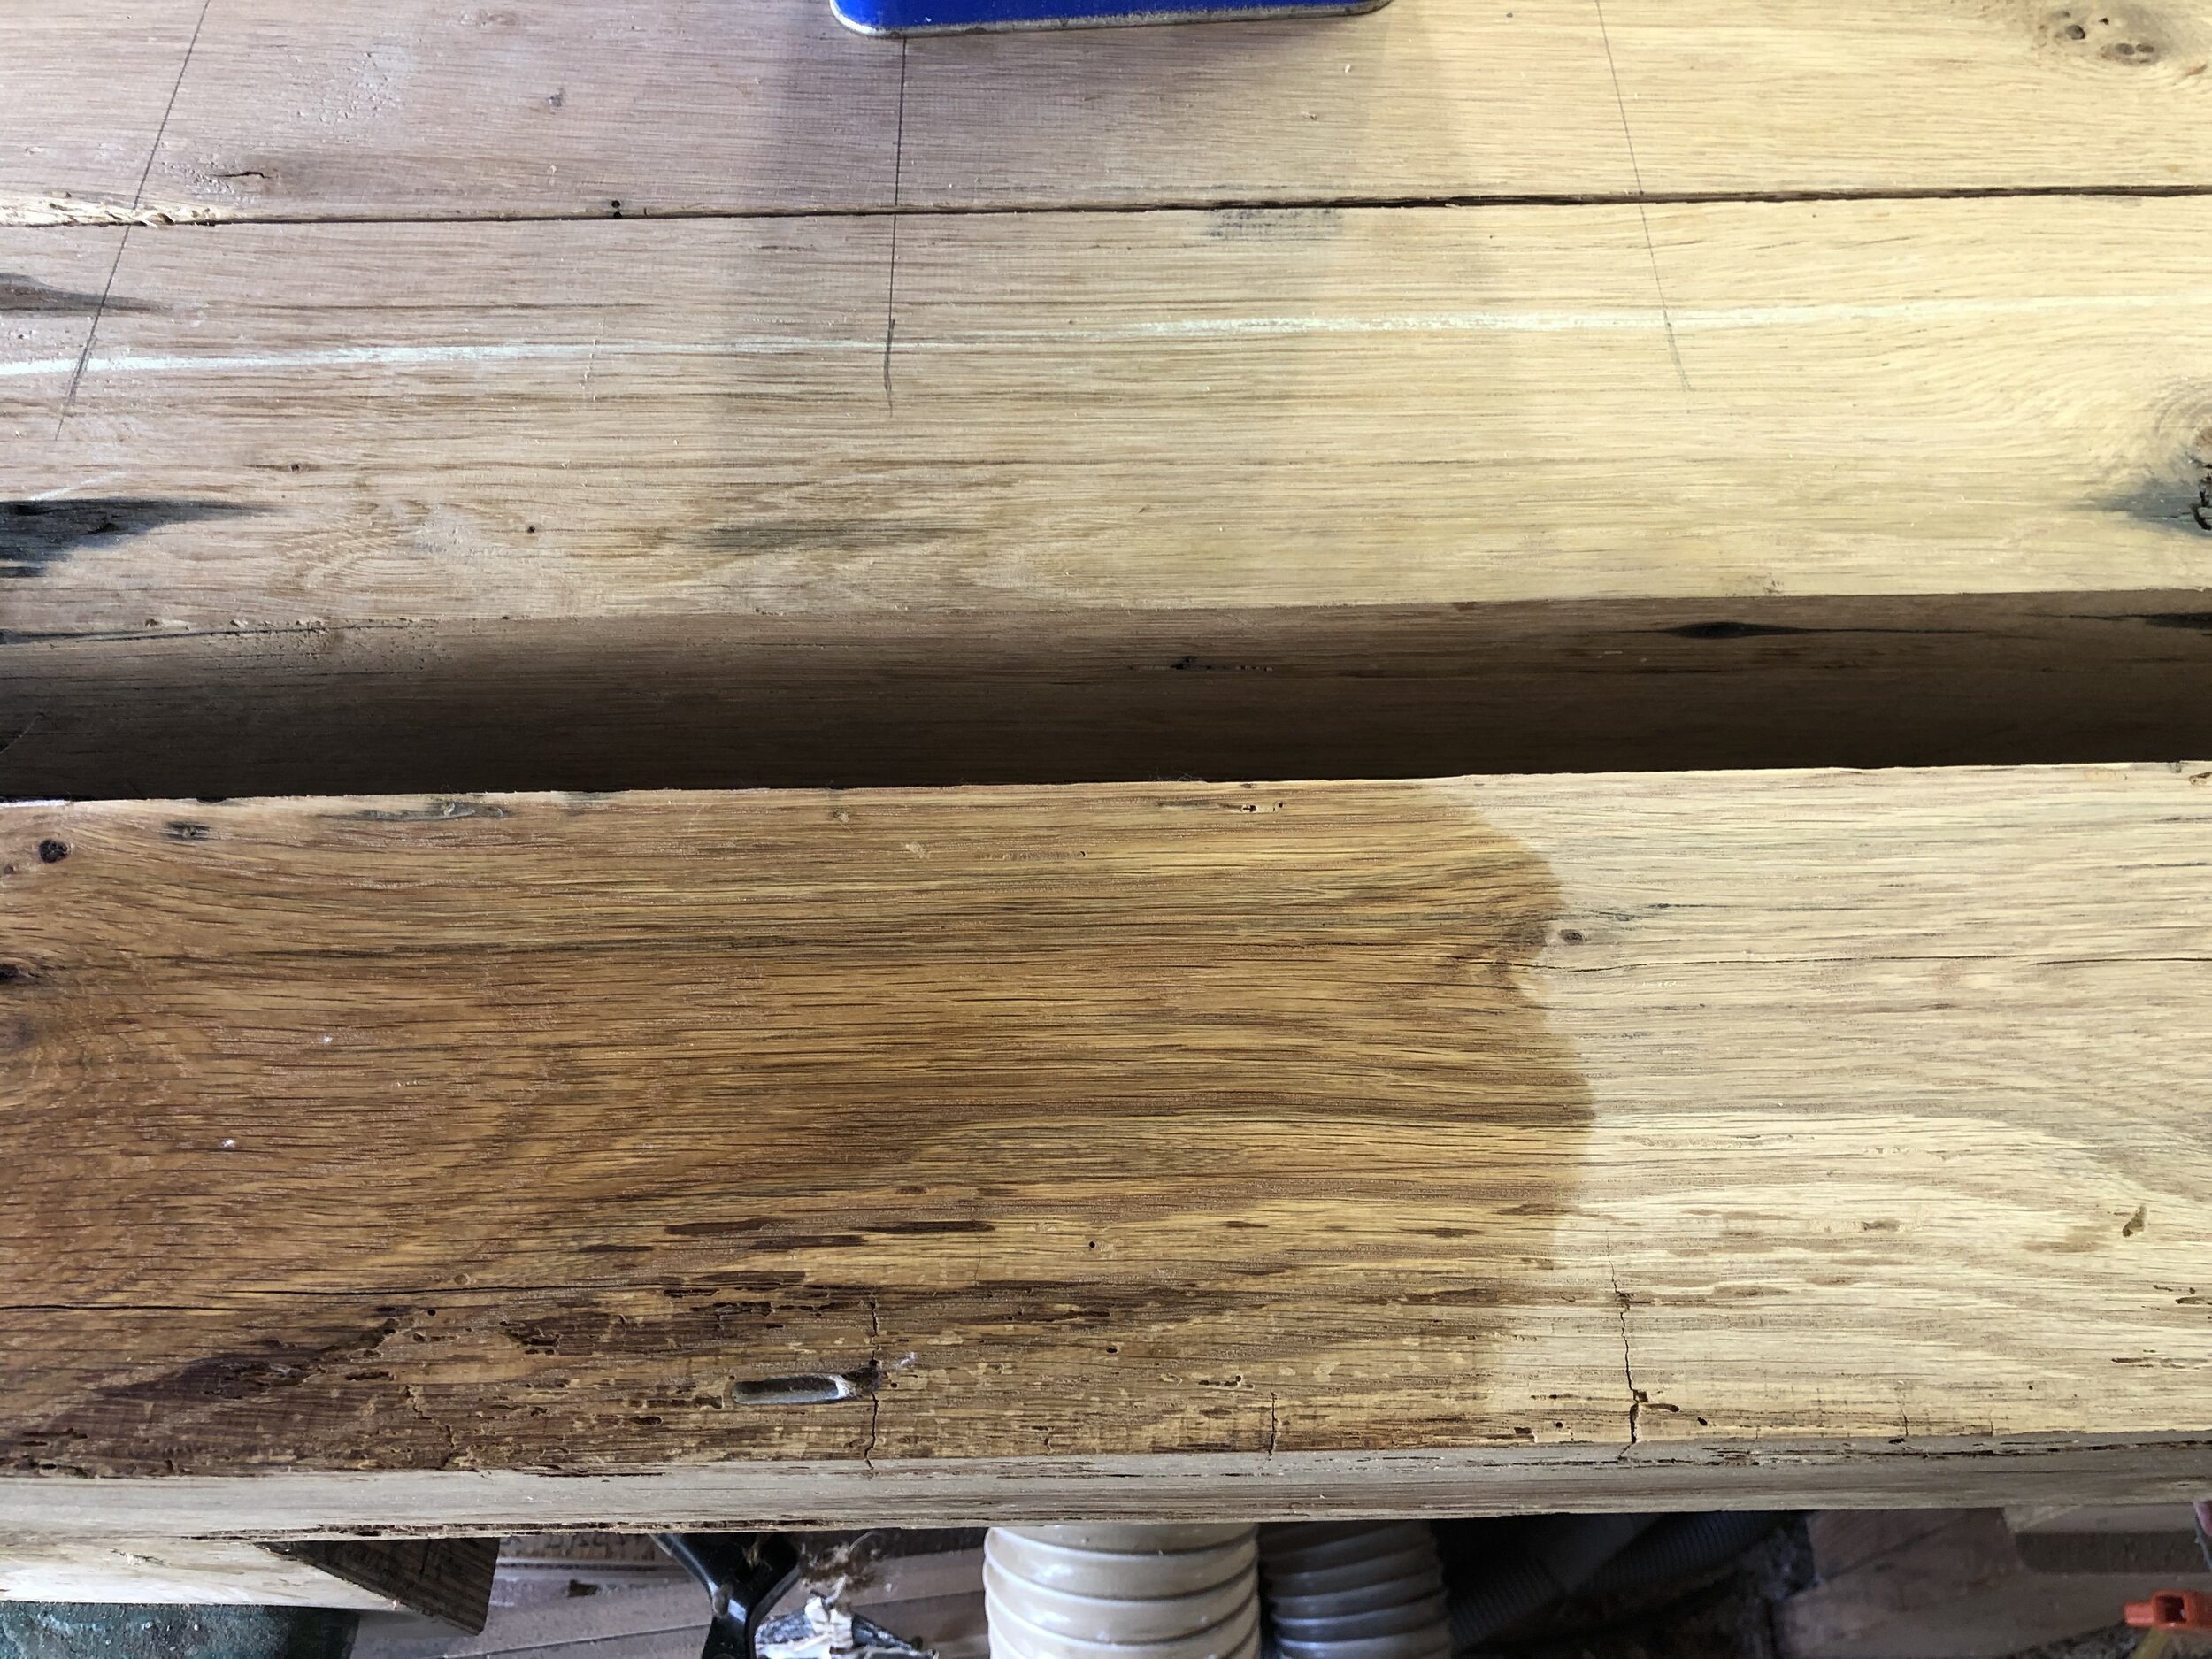  The barn wood is around 100-200 years old and has a lot of character. In order to maintain that character, I recommend to my clients that we only clear coat the wood, instead of staining it. Here I was using a quick application of mineral spirits to